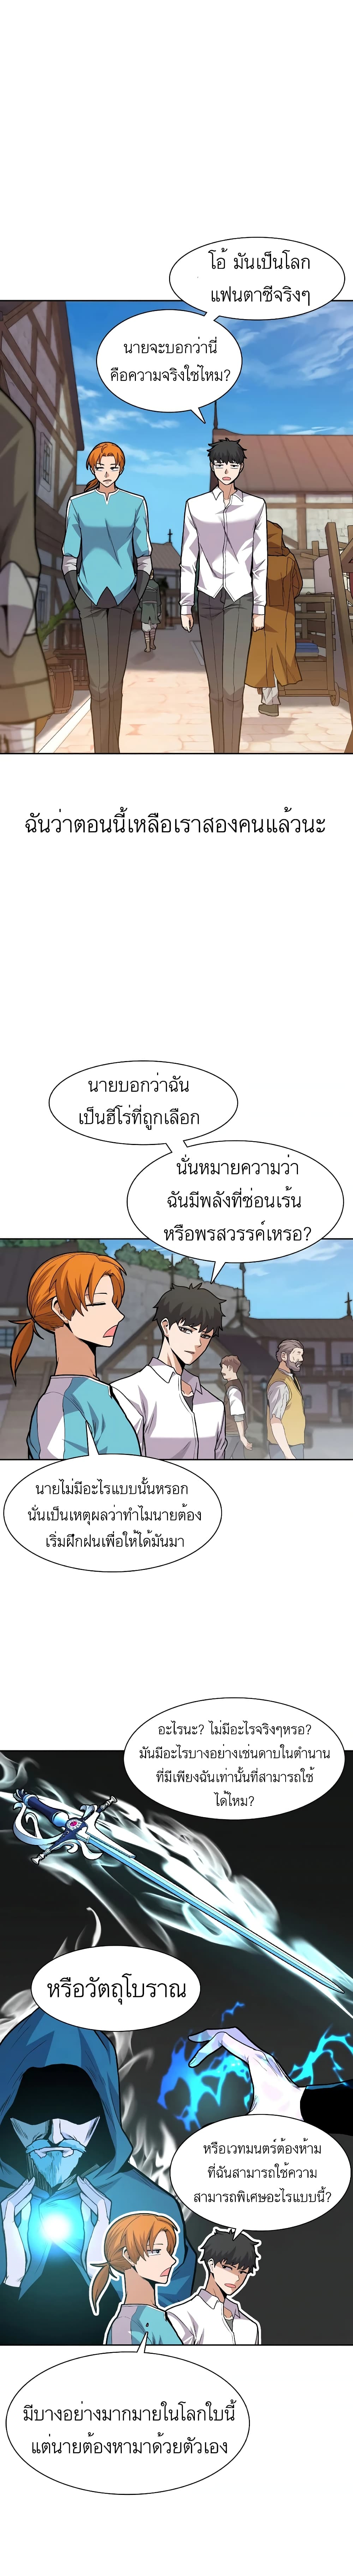 Raising Newbie Heroes In Another World ตอนที่ 2 (18)